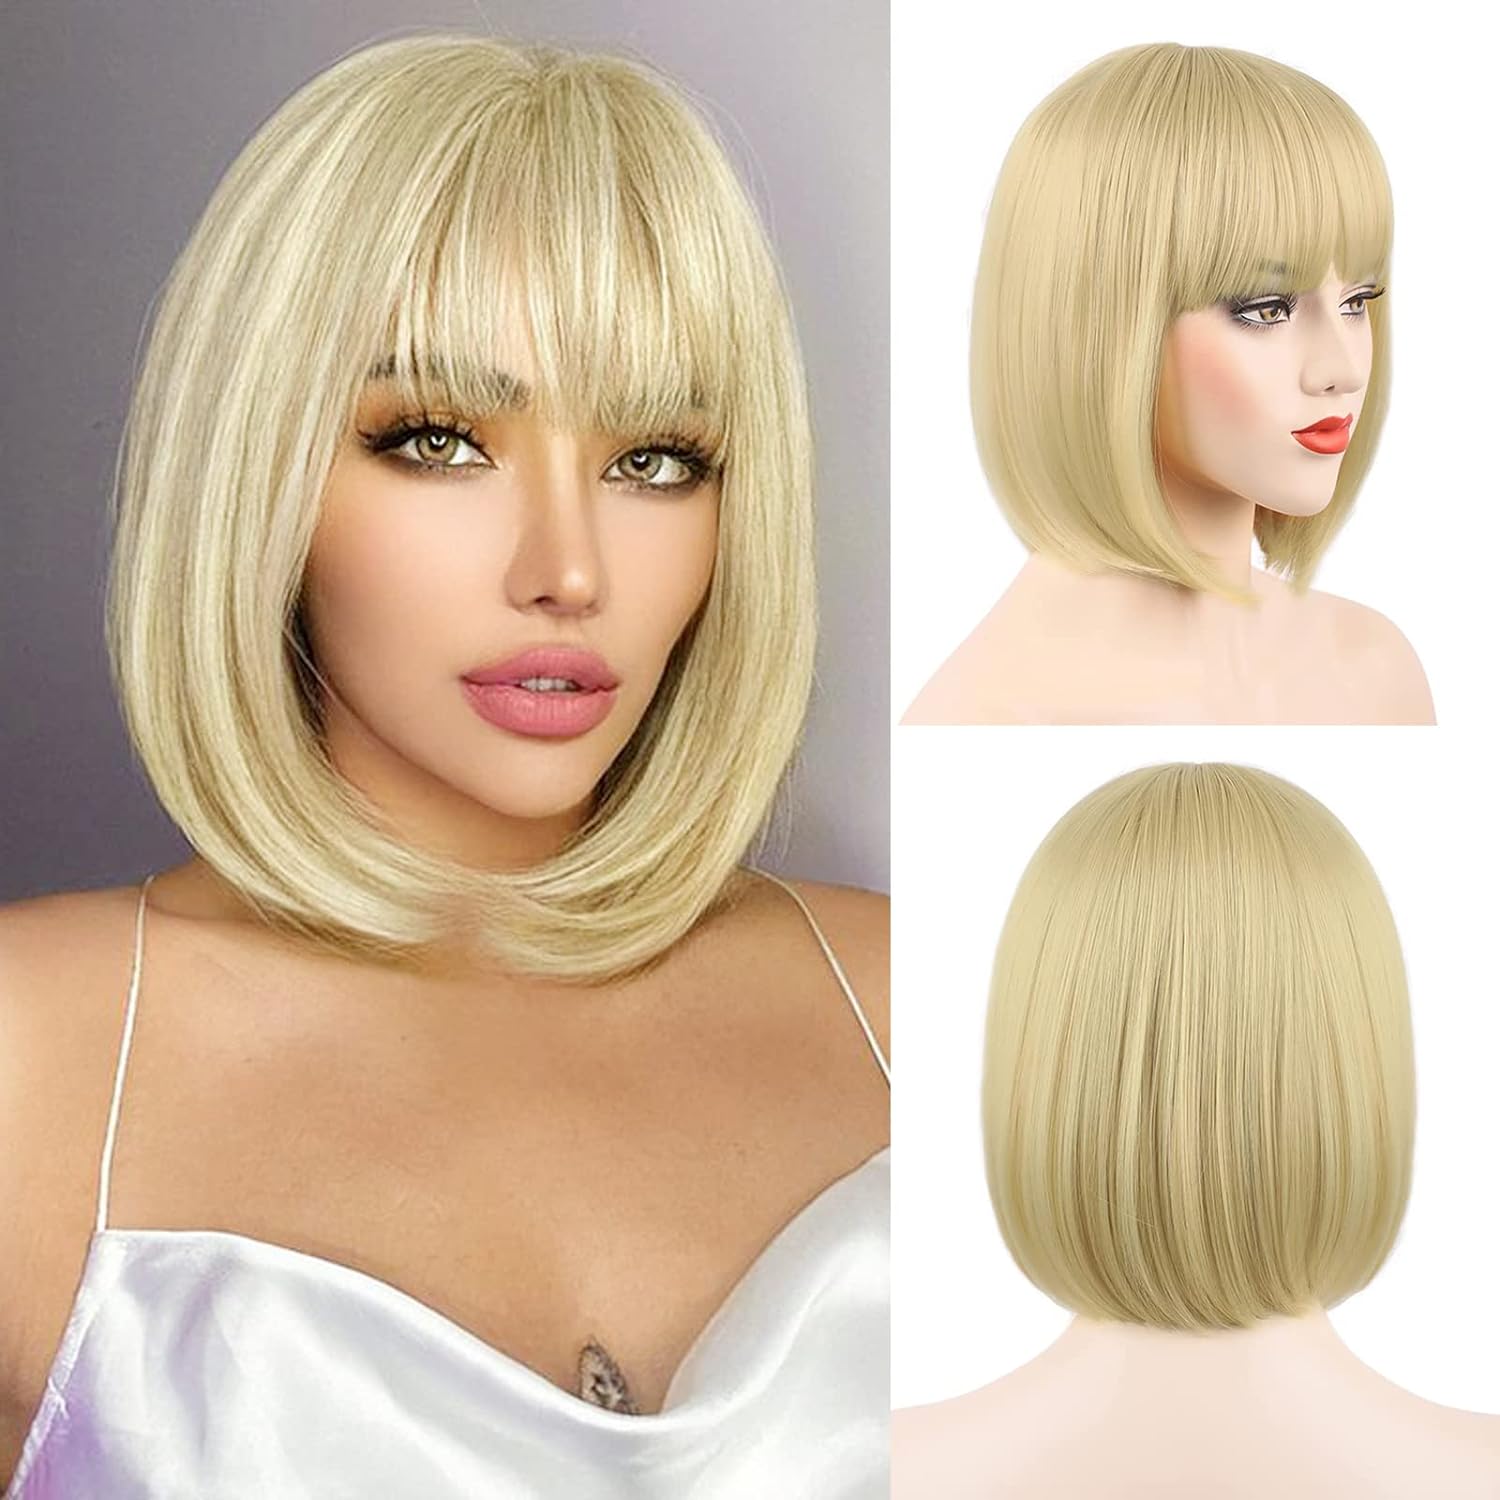 How to Style a Soft Bob Wig